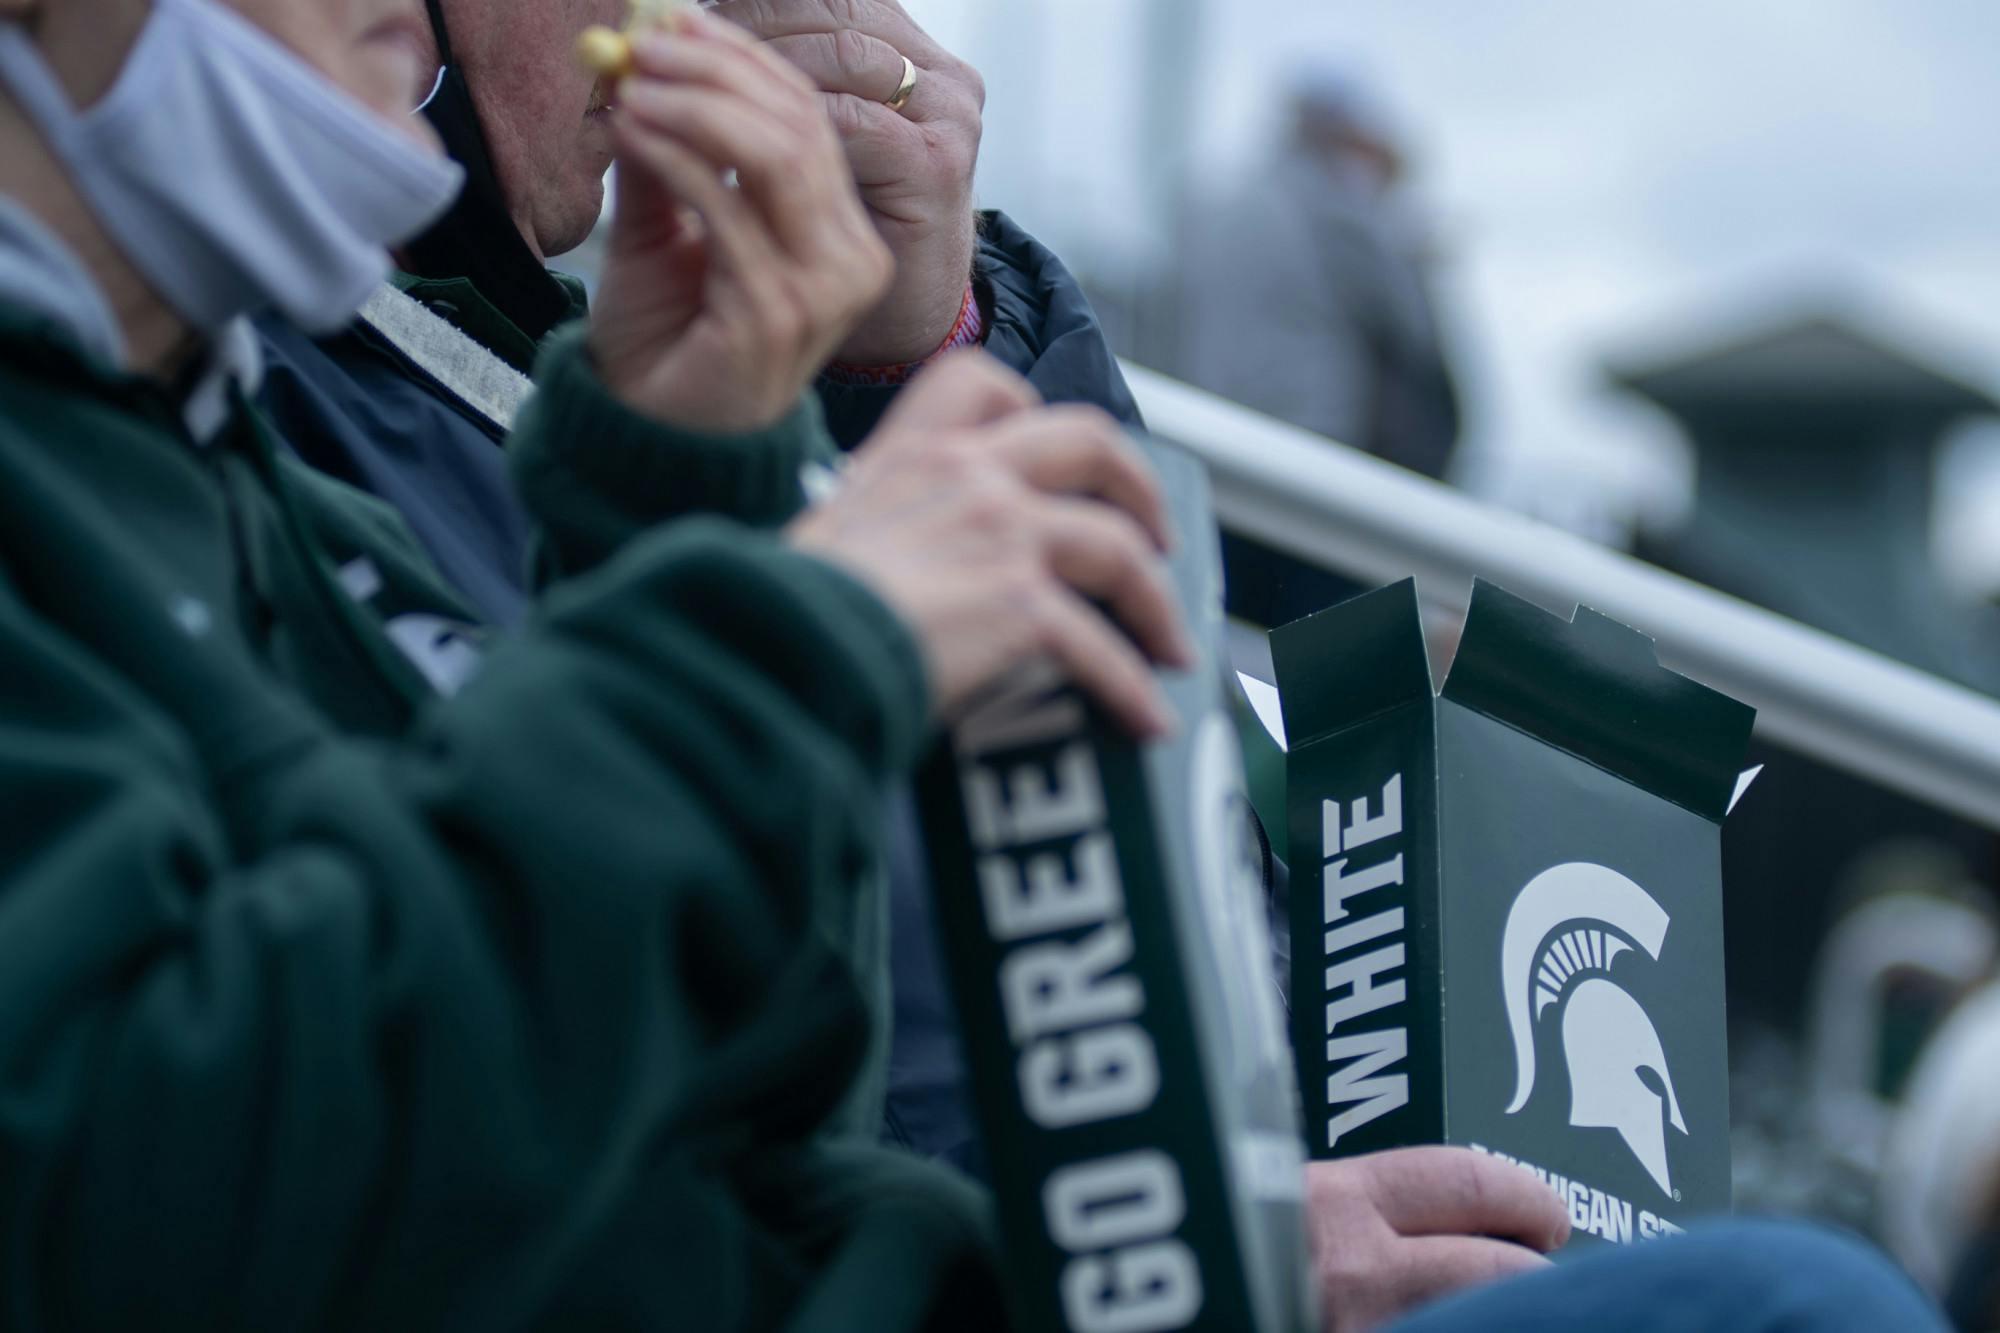 Michigan State fans eating popcorn during Michigan State's game against Purdue on April 12, 2021 at McLane Stadium at Kob's Field in East Lansing. 